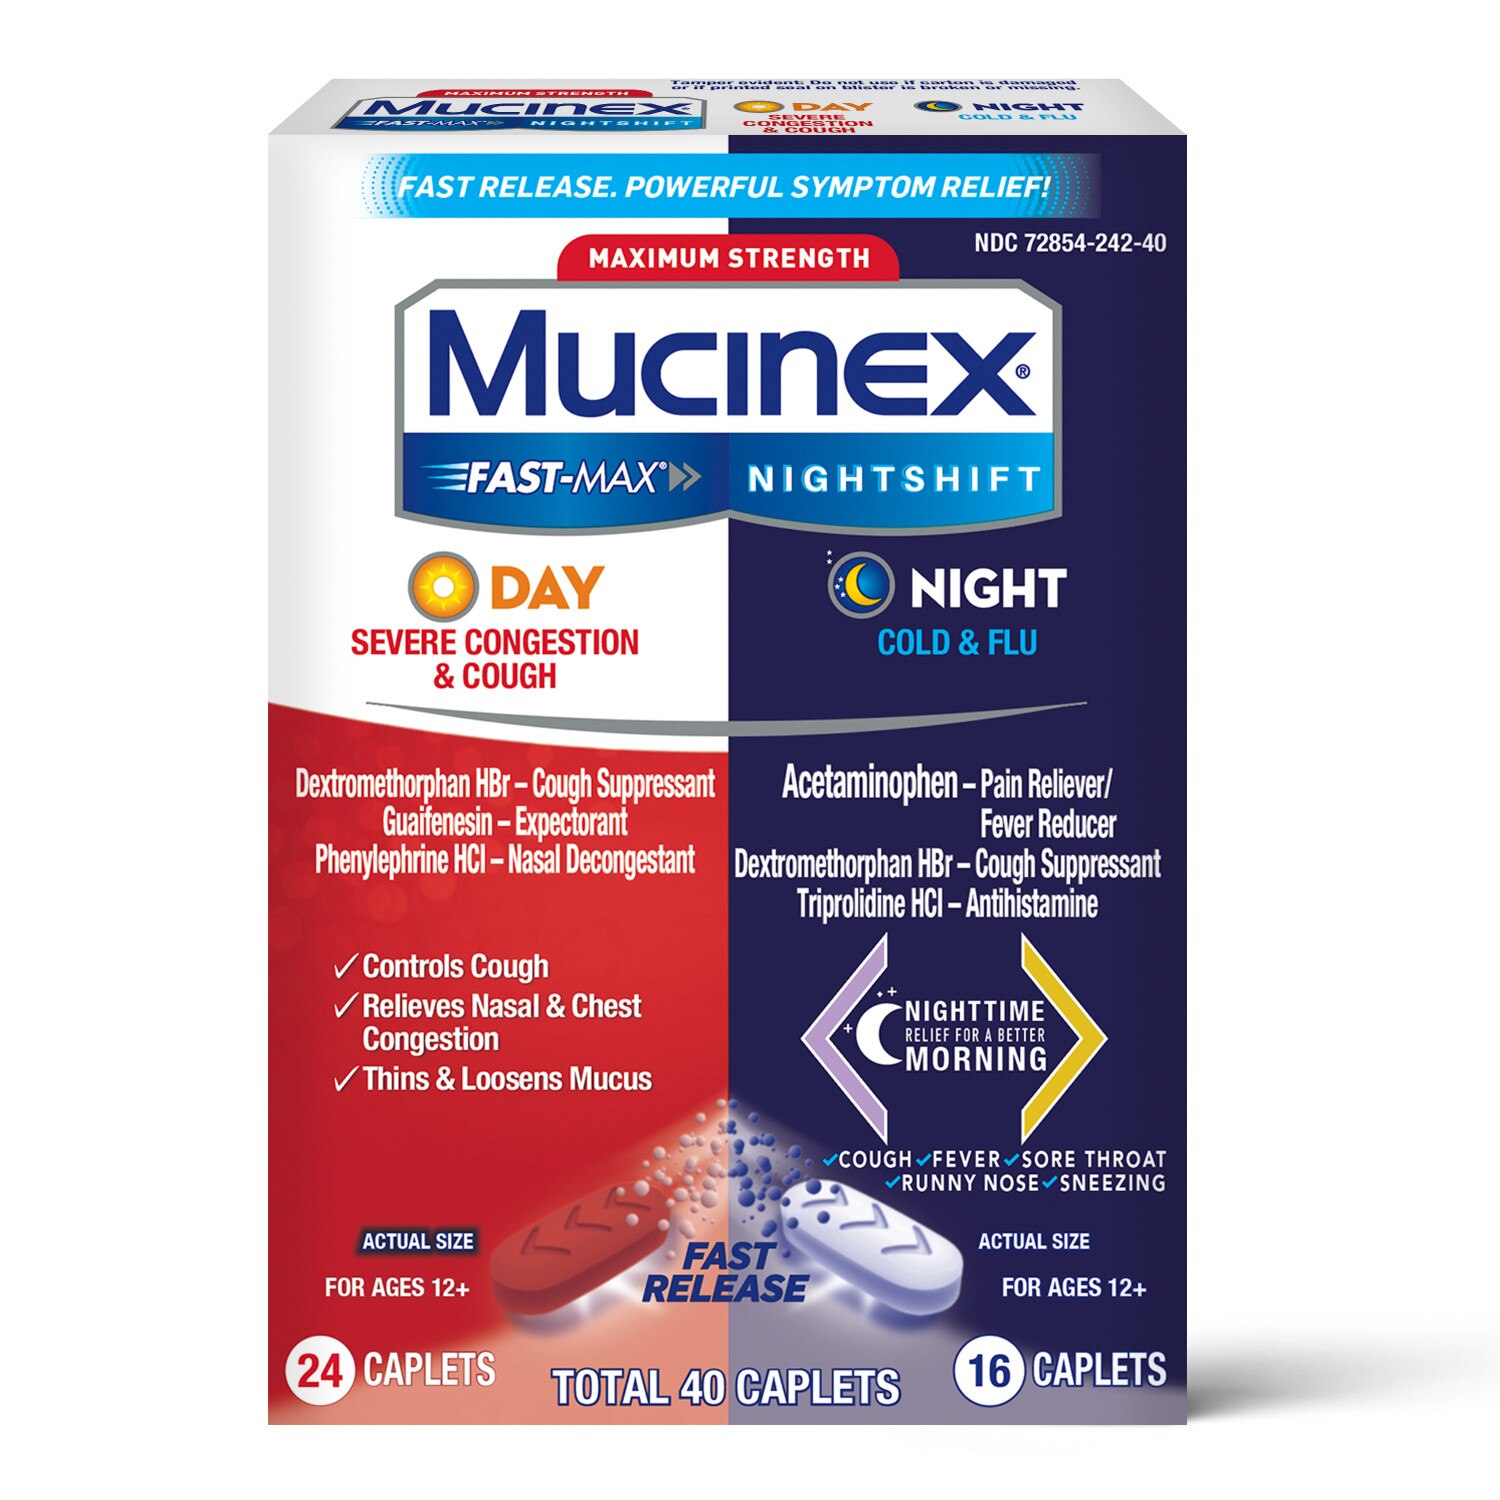 Mucinex Fast-Max Day Severe Congestion and Cough & Nightshift Cold and Flu Combo Pack, 40 CT